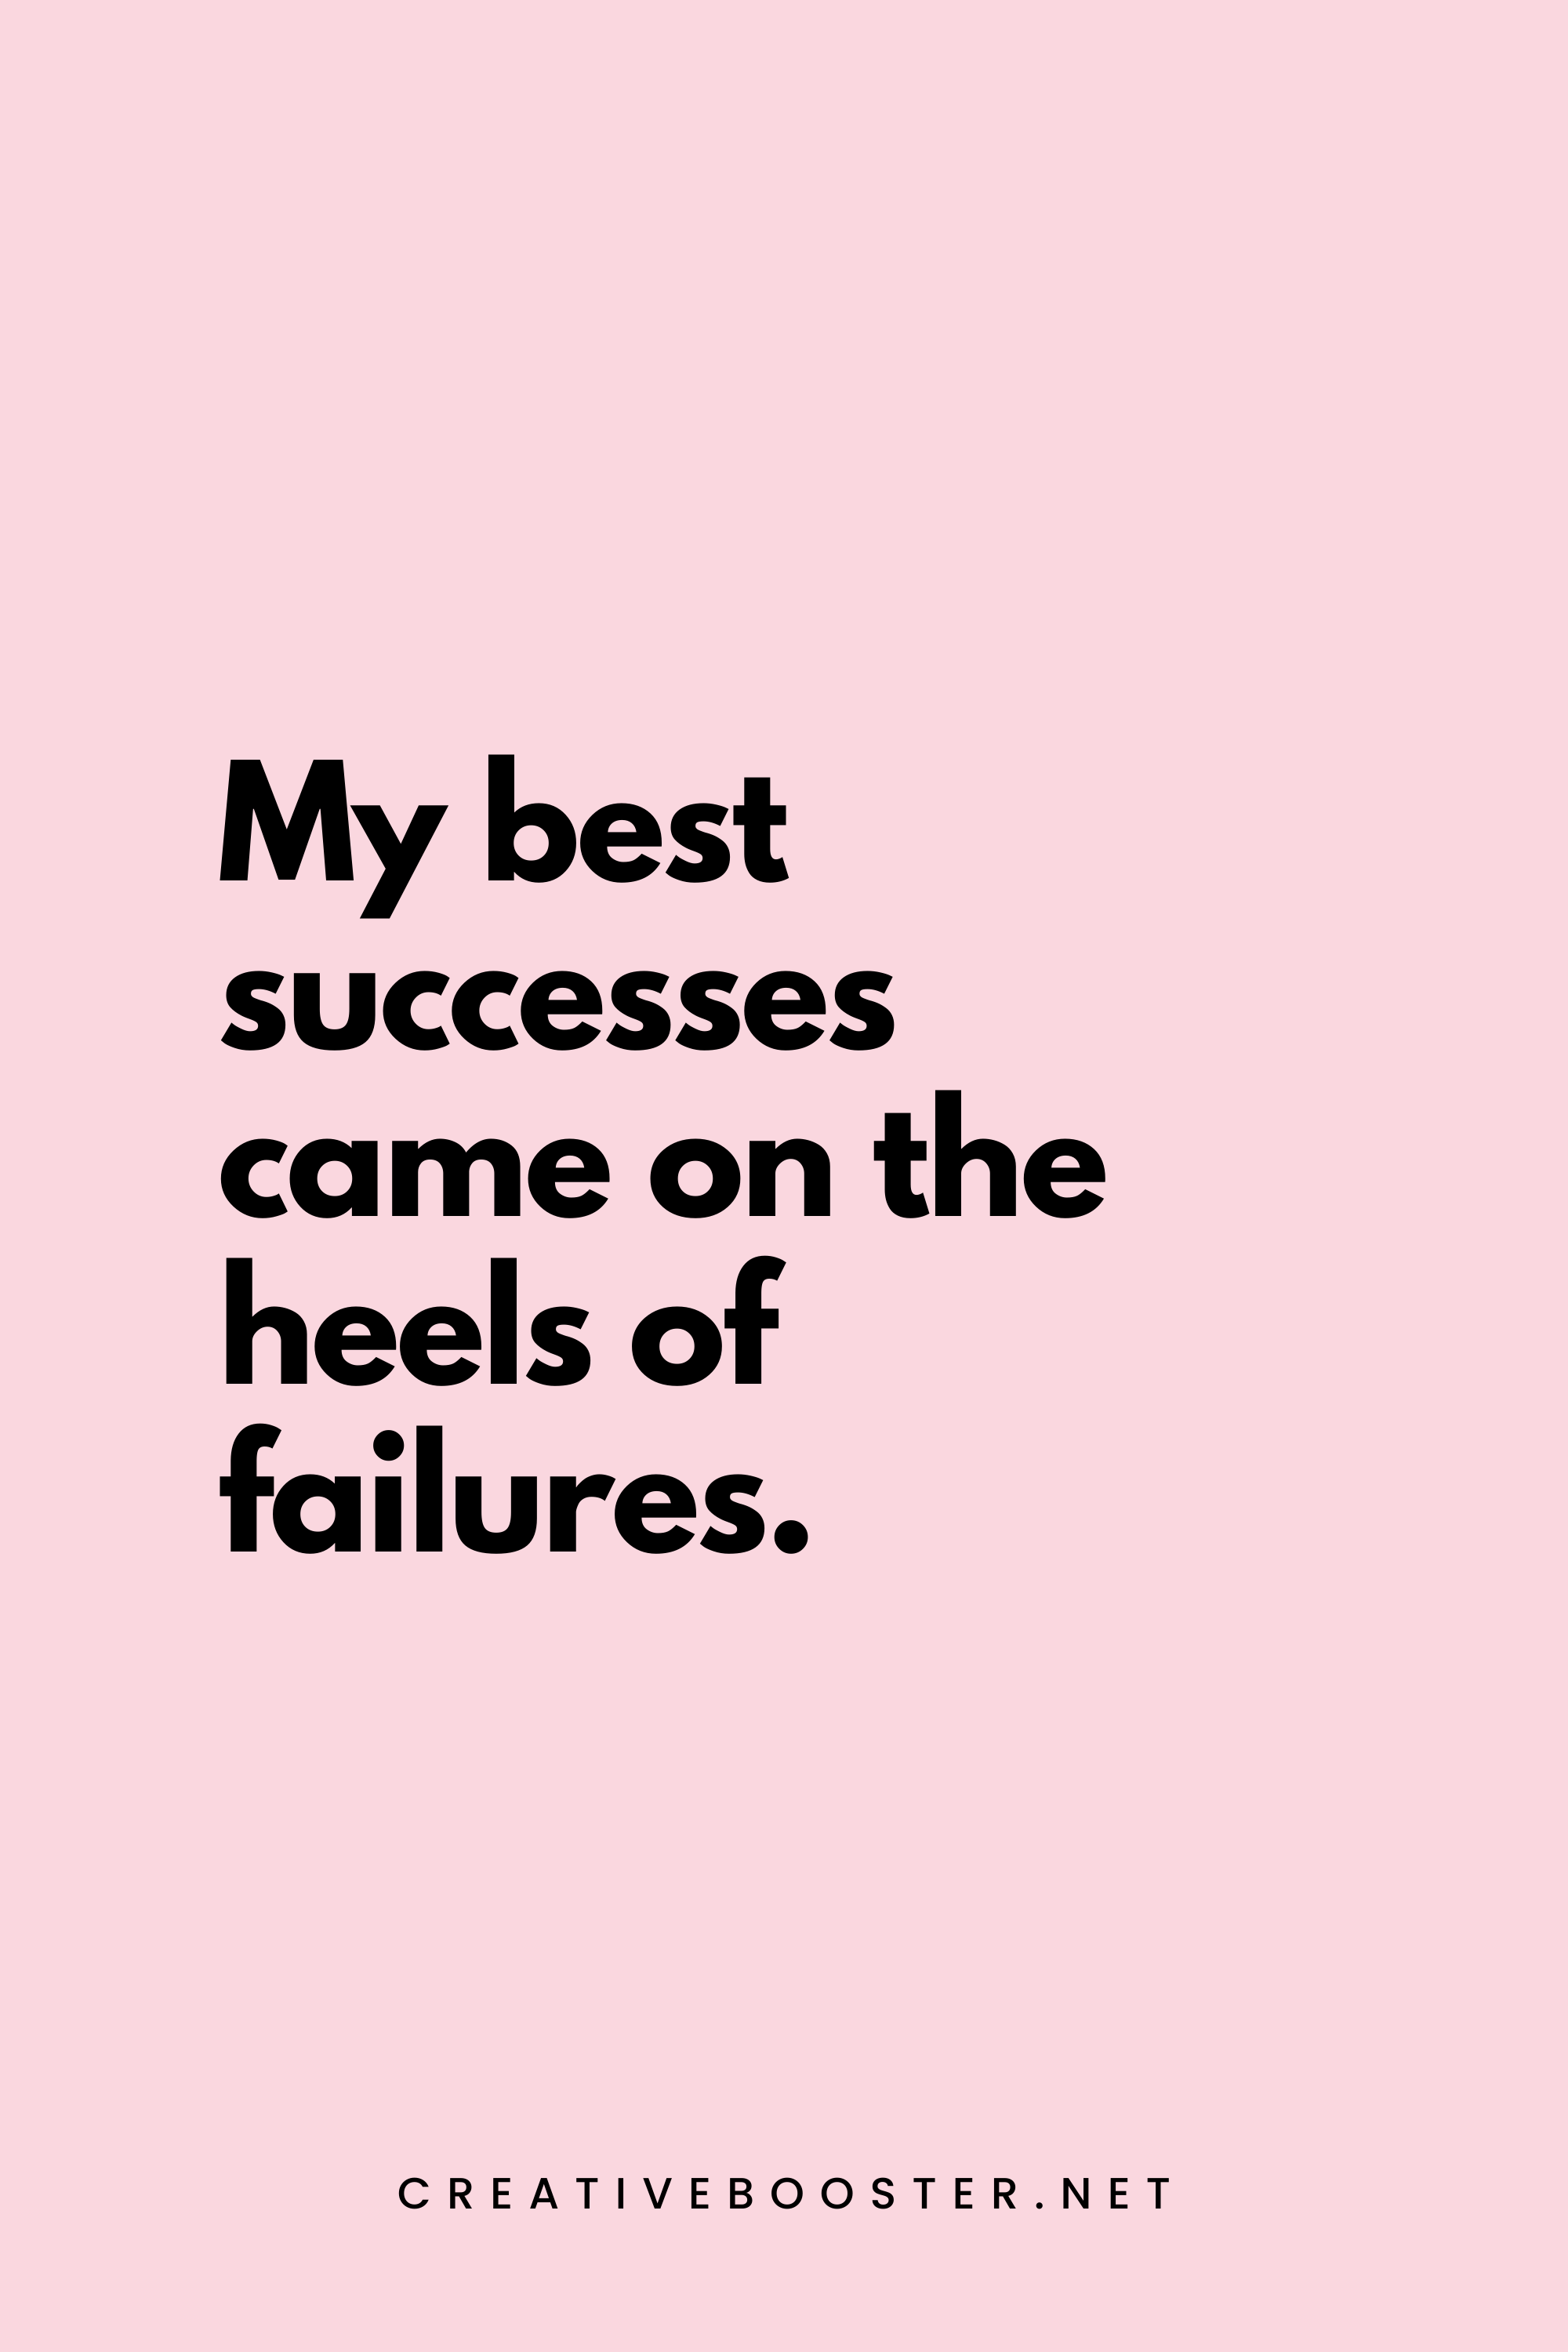 41. My best successes came on the heels of failures. - Barbara Corcoran - 4. Financial Freedom Quotes for Women